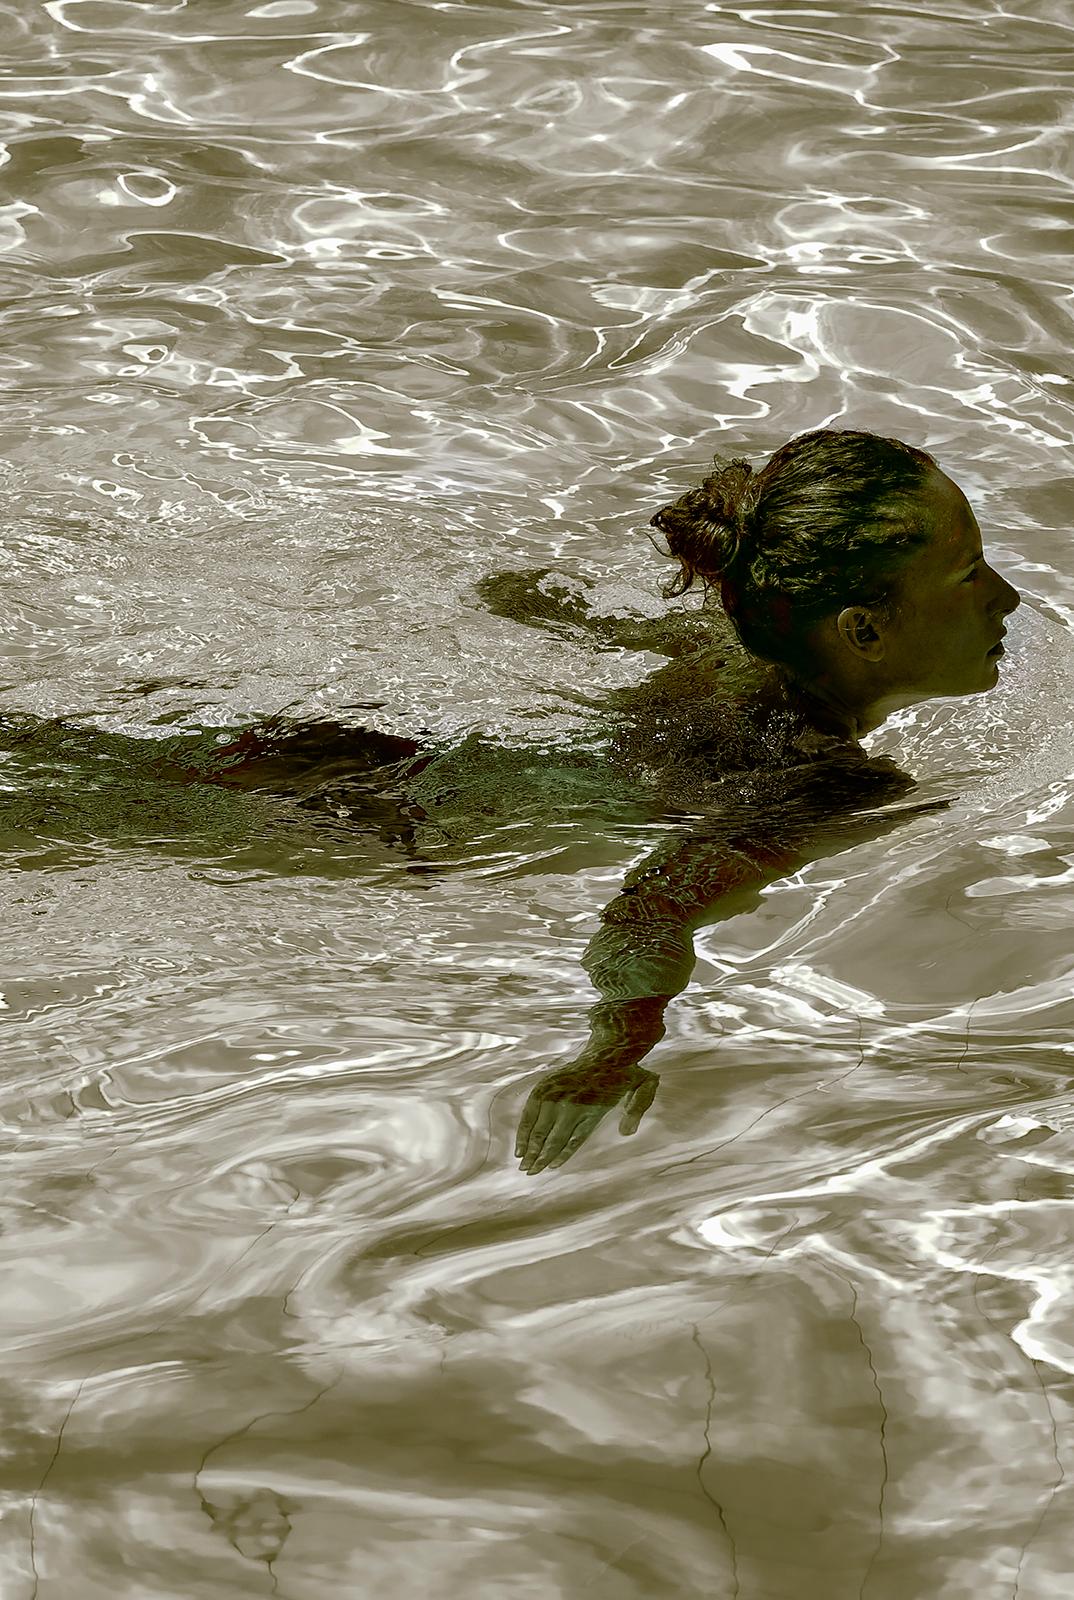 Swim - Signed limited edition contemporary print, Color pool, Sensual model - Photograph by Ian Sanderson